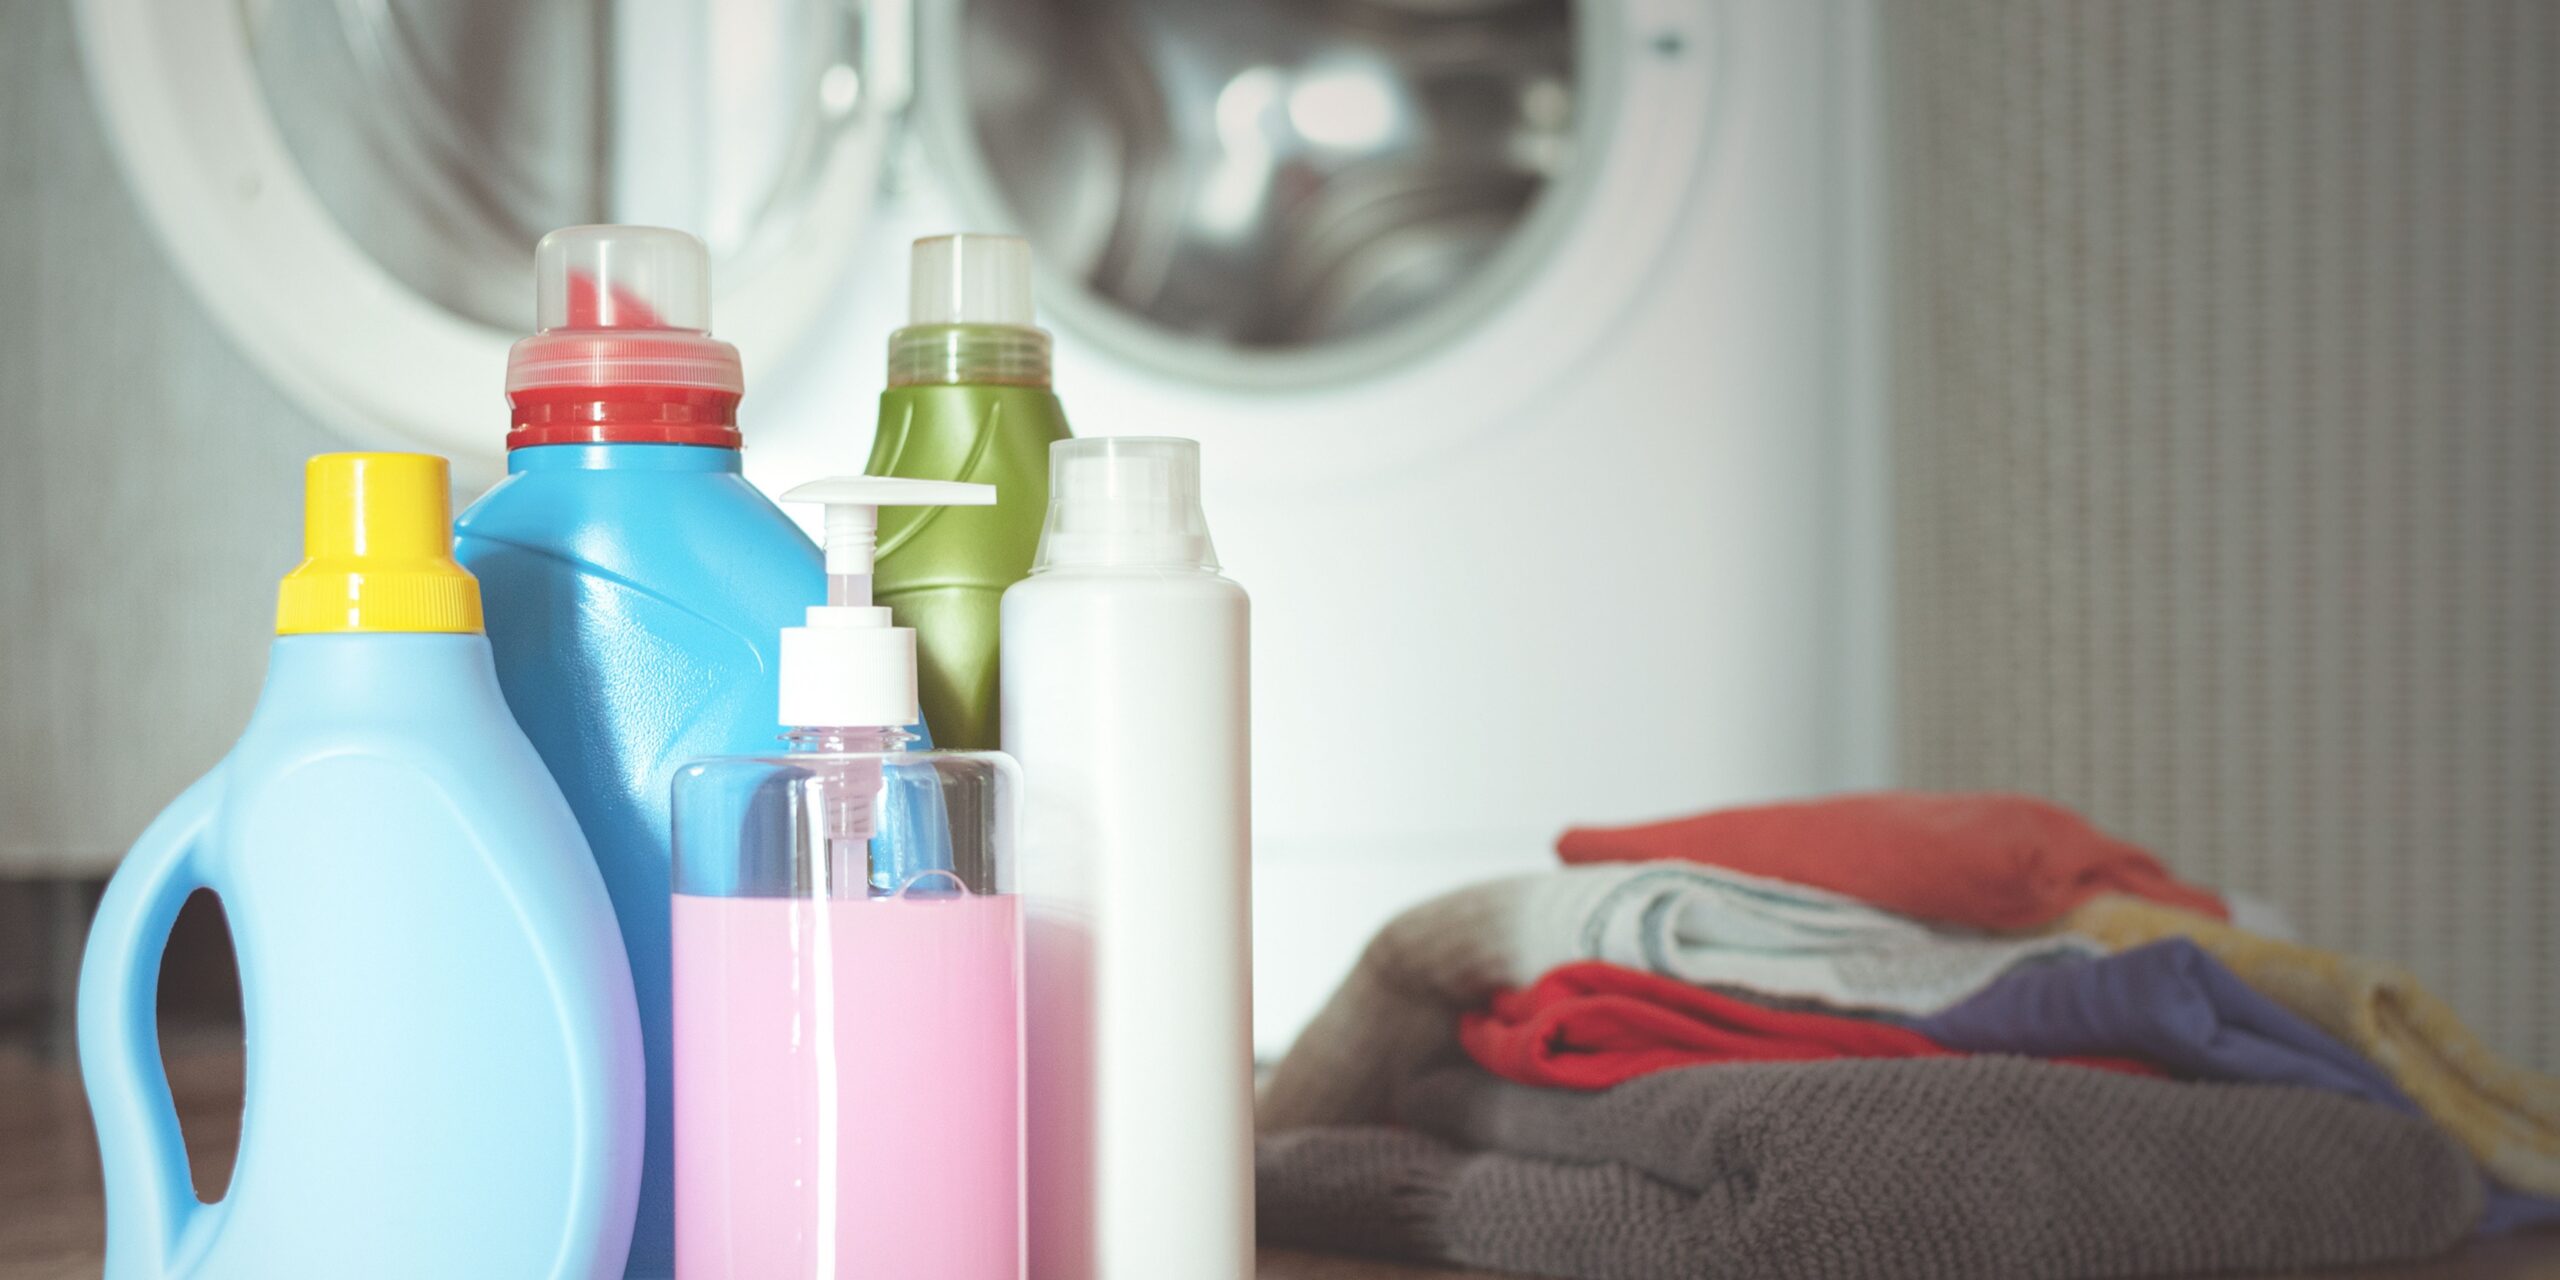 How To Find The Best Laundry Detergent These Days